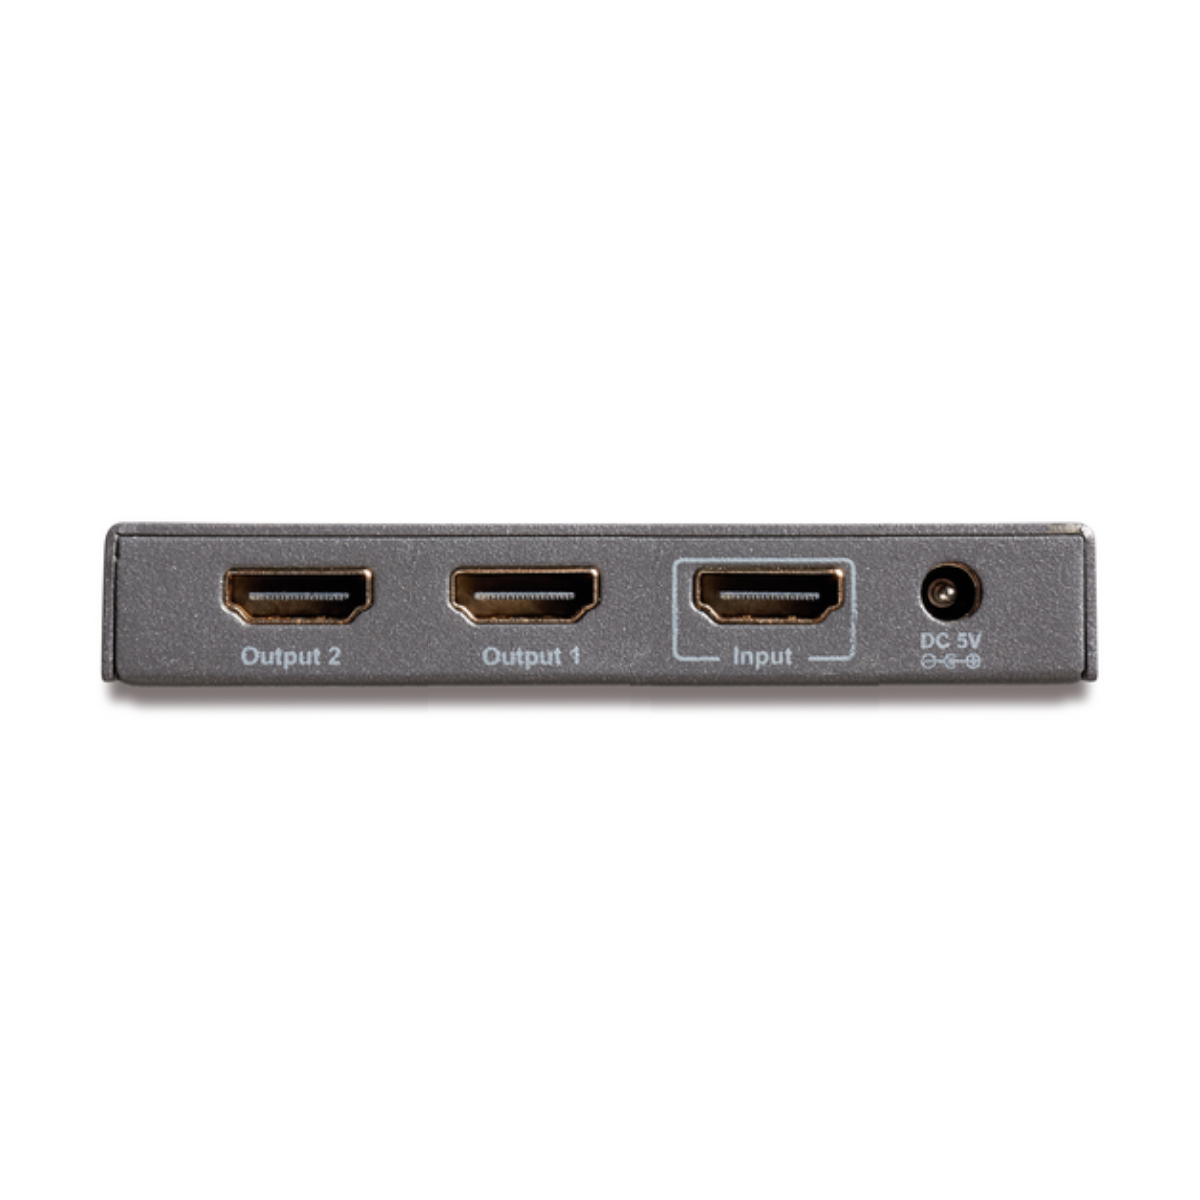 Split 612 UHD 2.0 - 4K HDMI splitter 1 in / 2 out - Connections Image HDMI in and outputs | Marmitek